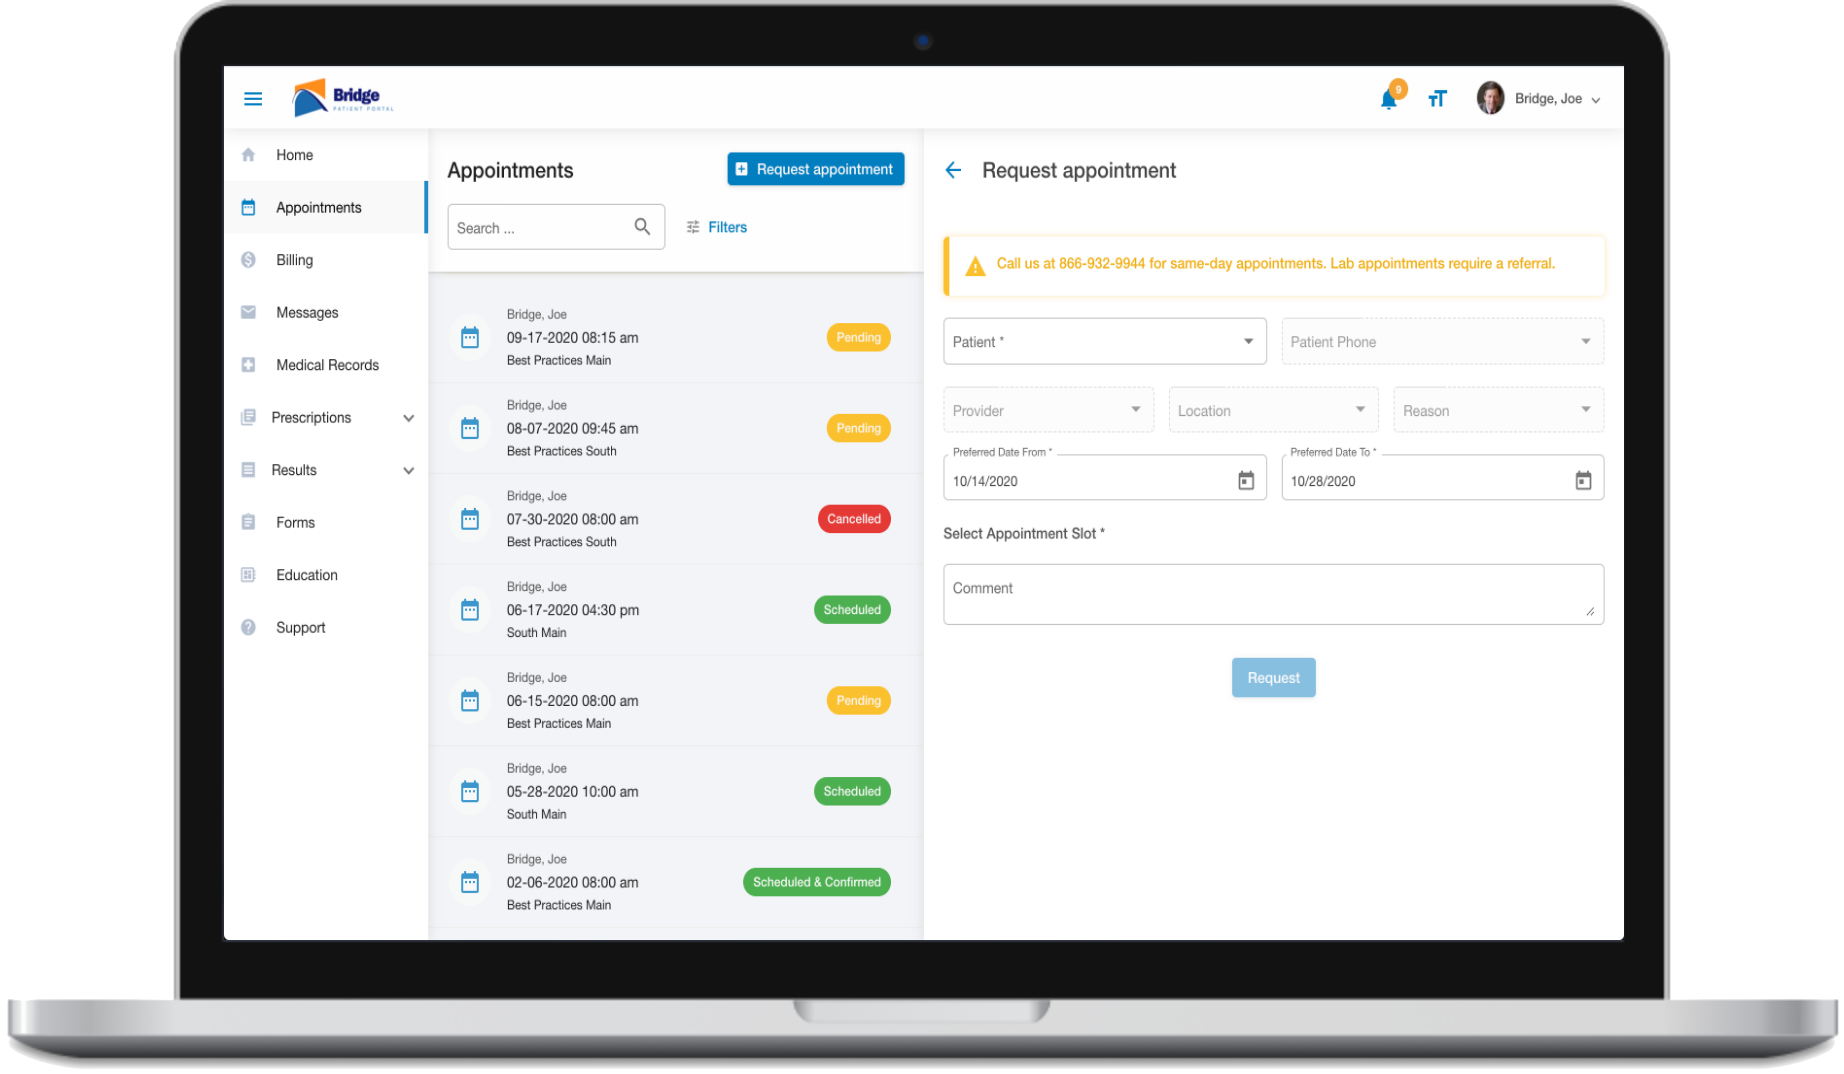 Bridge supports real-time, self-scheduling for most EHR/PM systems and accommodates custom workflows and complex decision trees